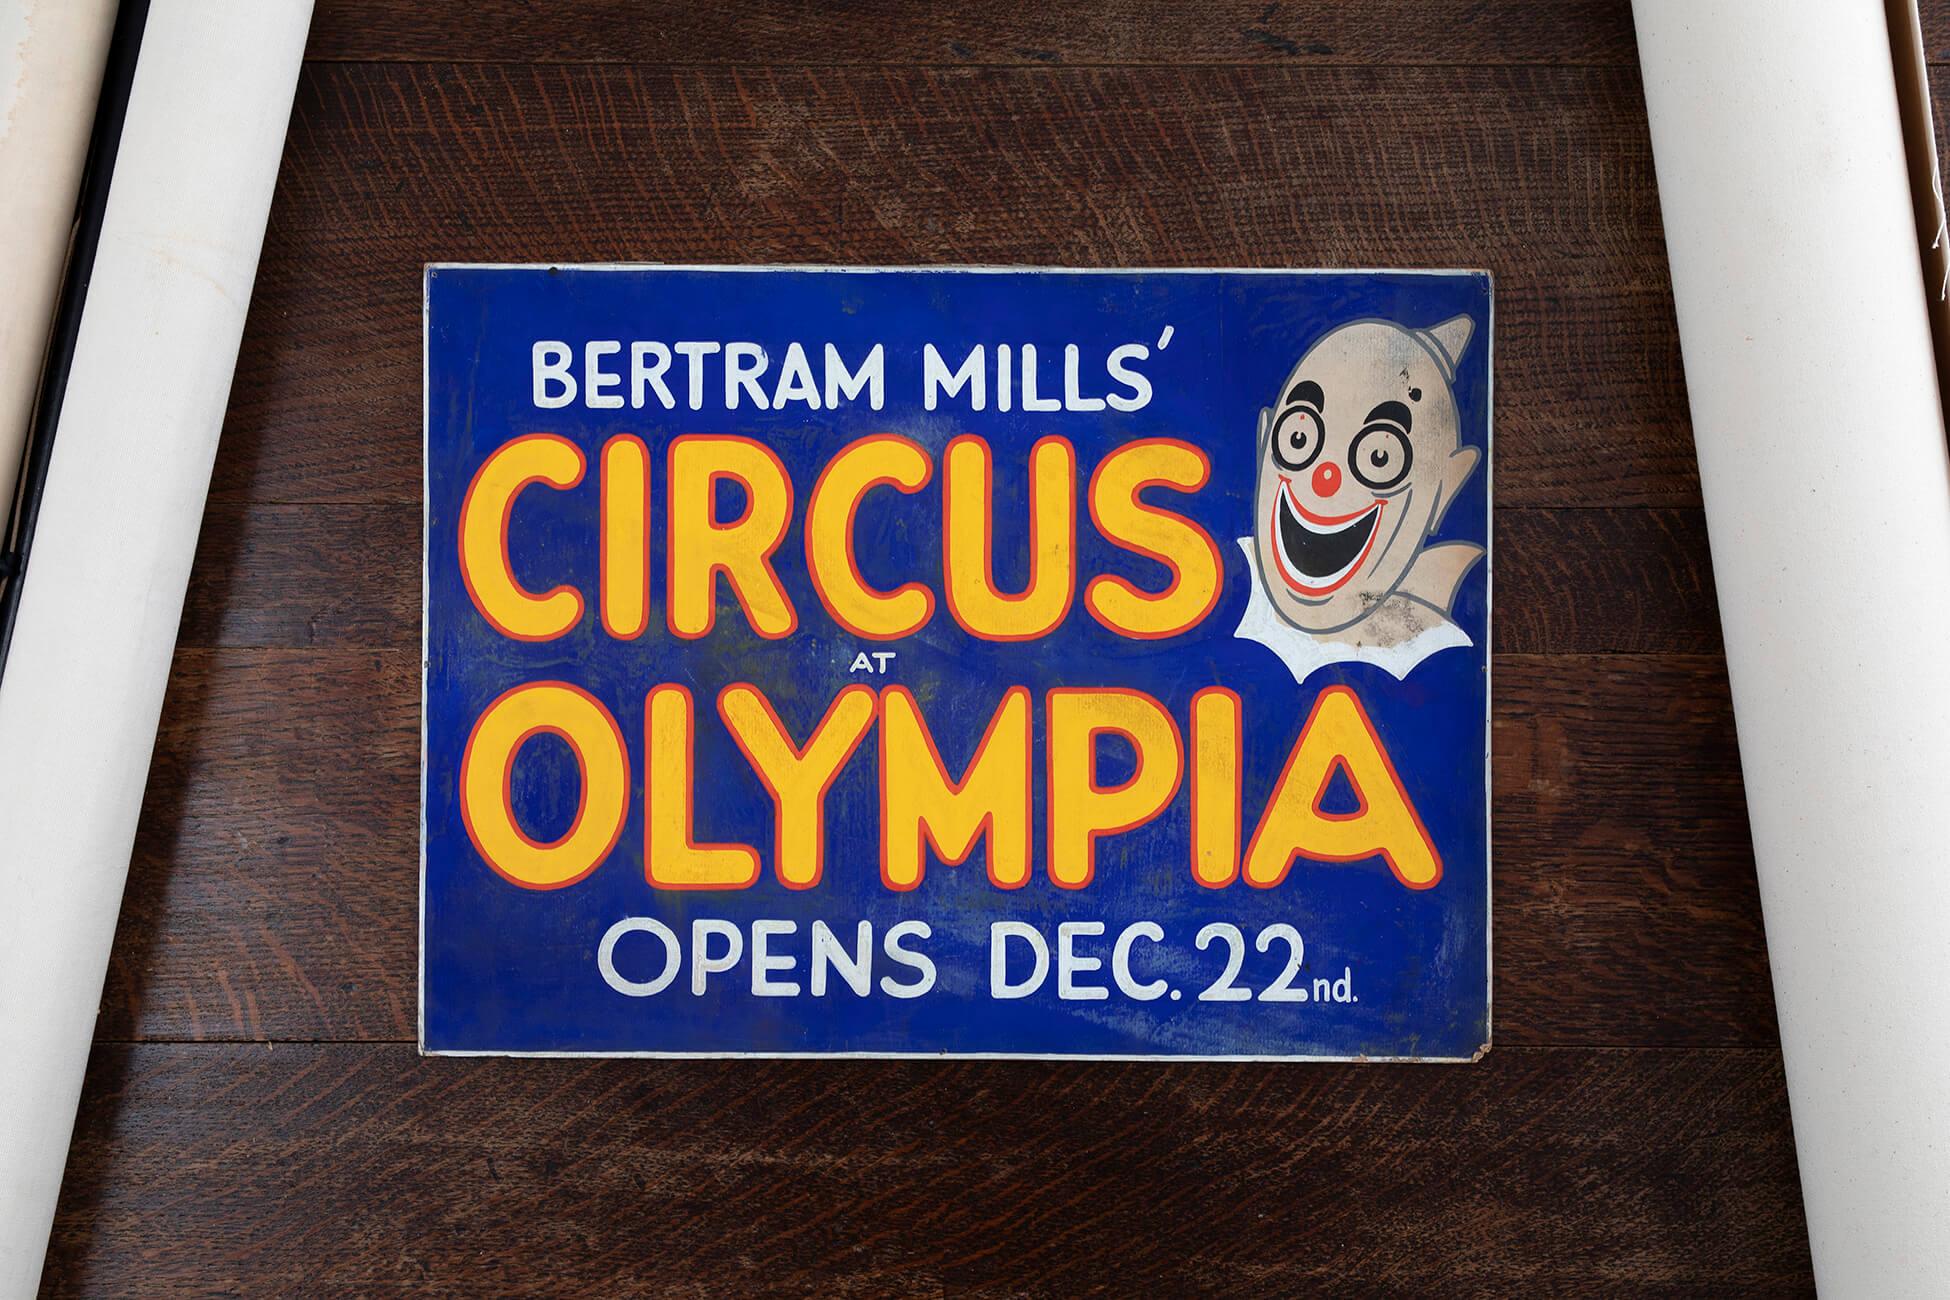 Plywood Circus at Olympia Hand-Painted Poster Artwork, circa 1930 For Sale